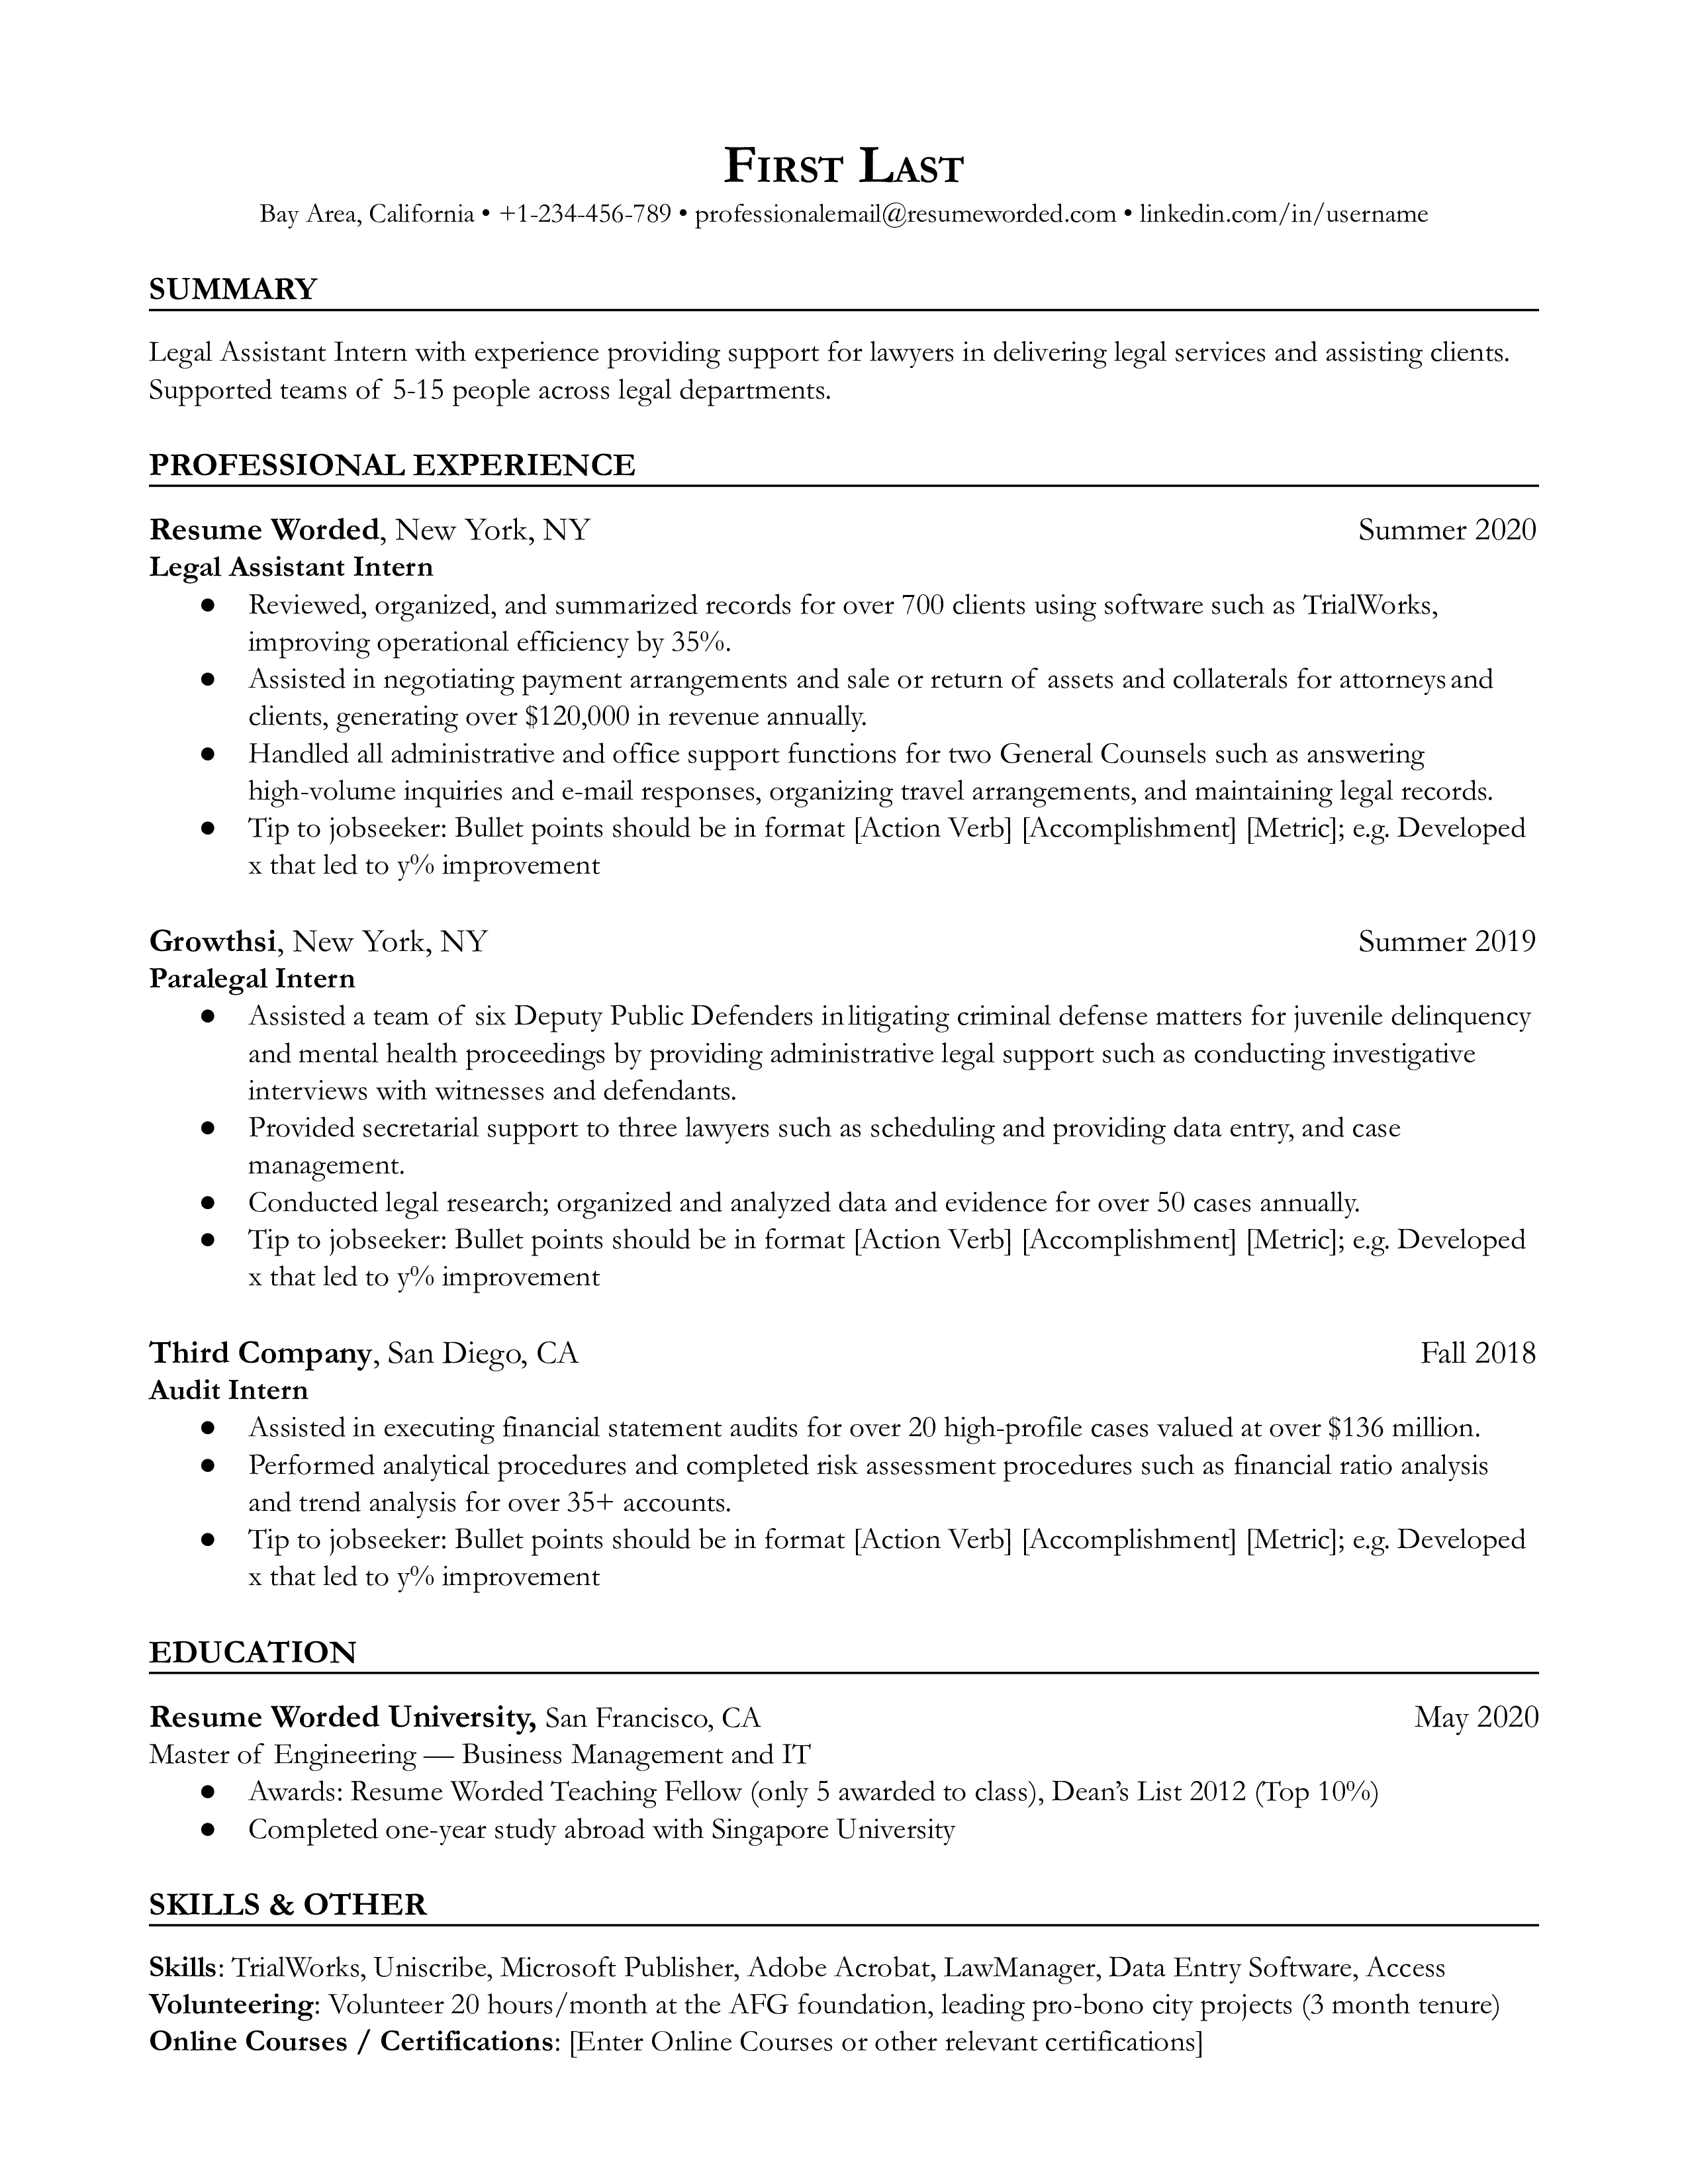 Entry-level legal assistant resume example